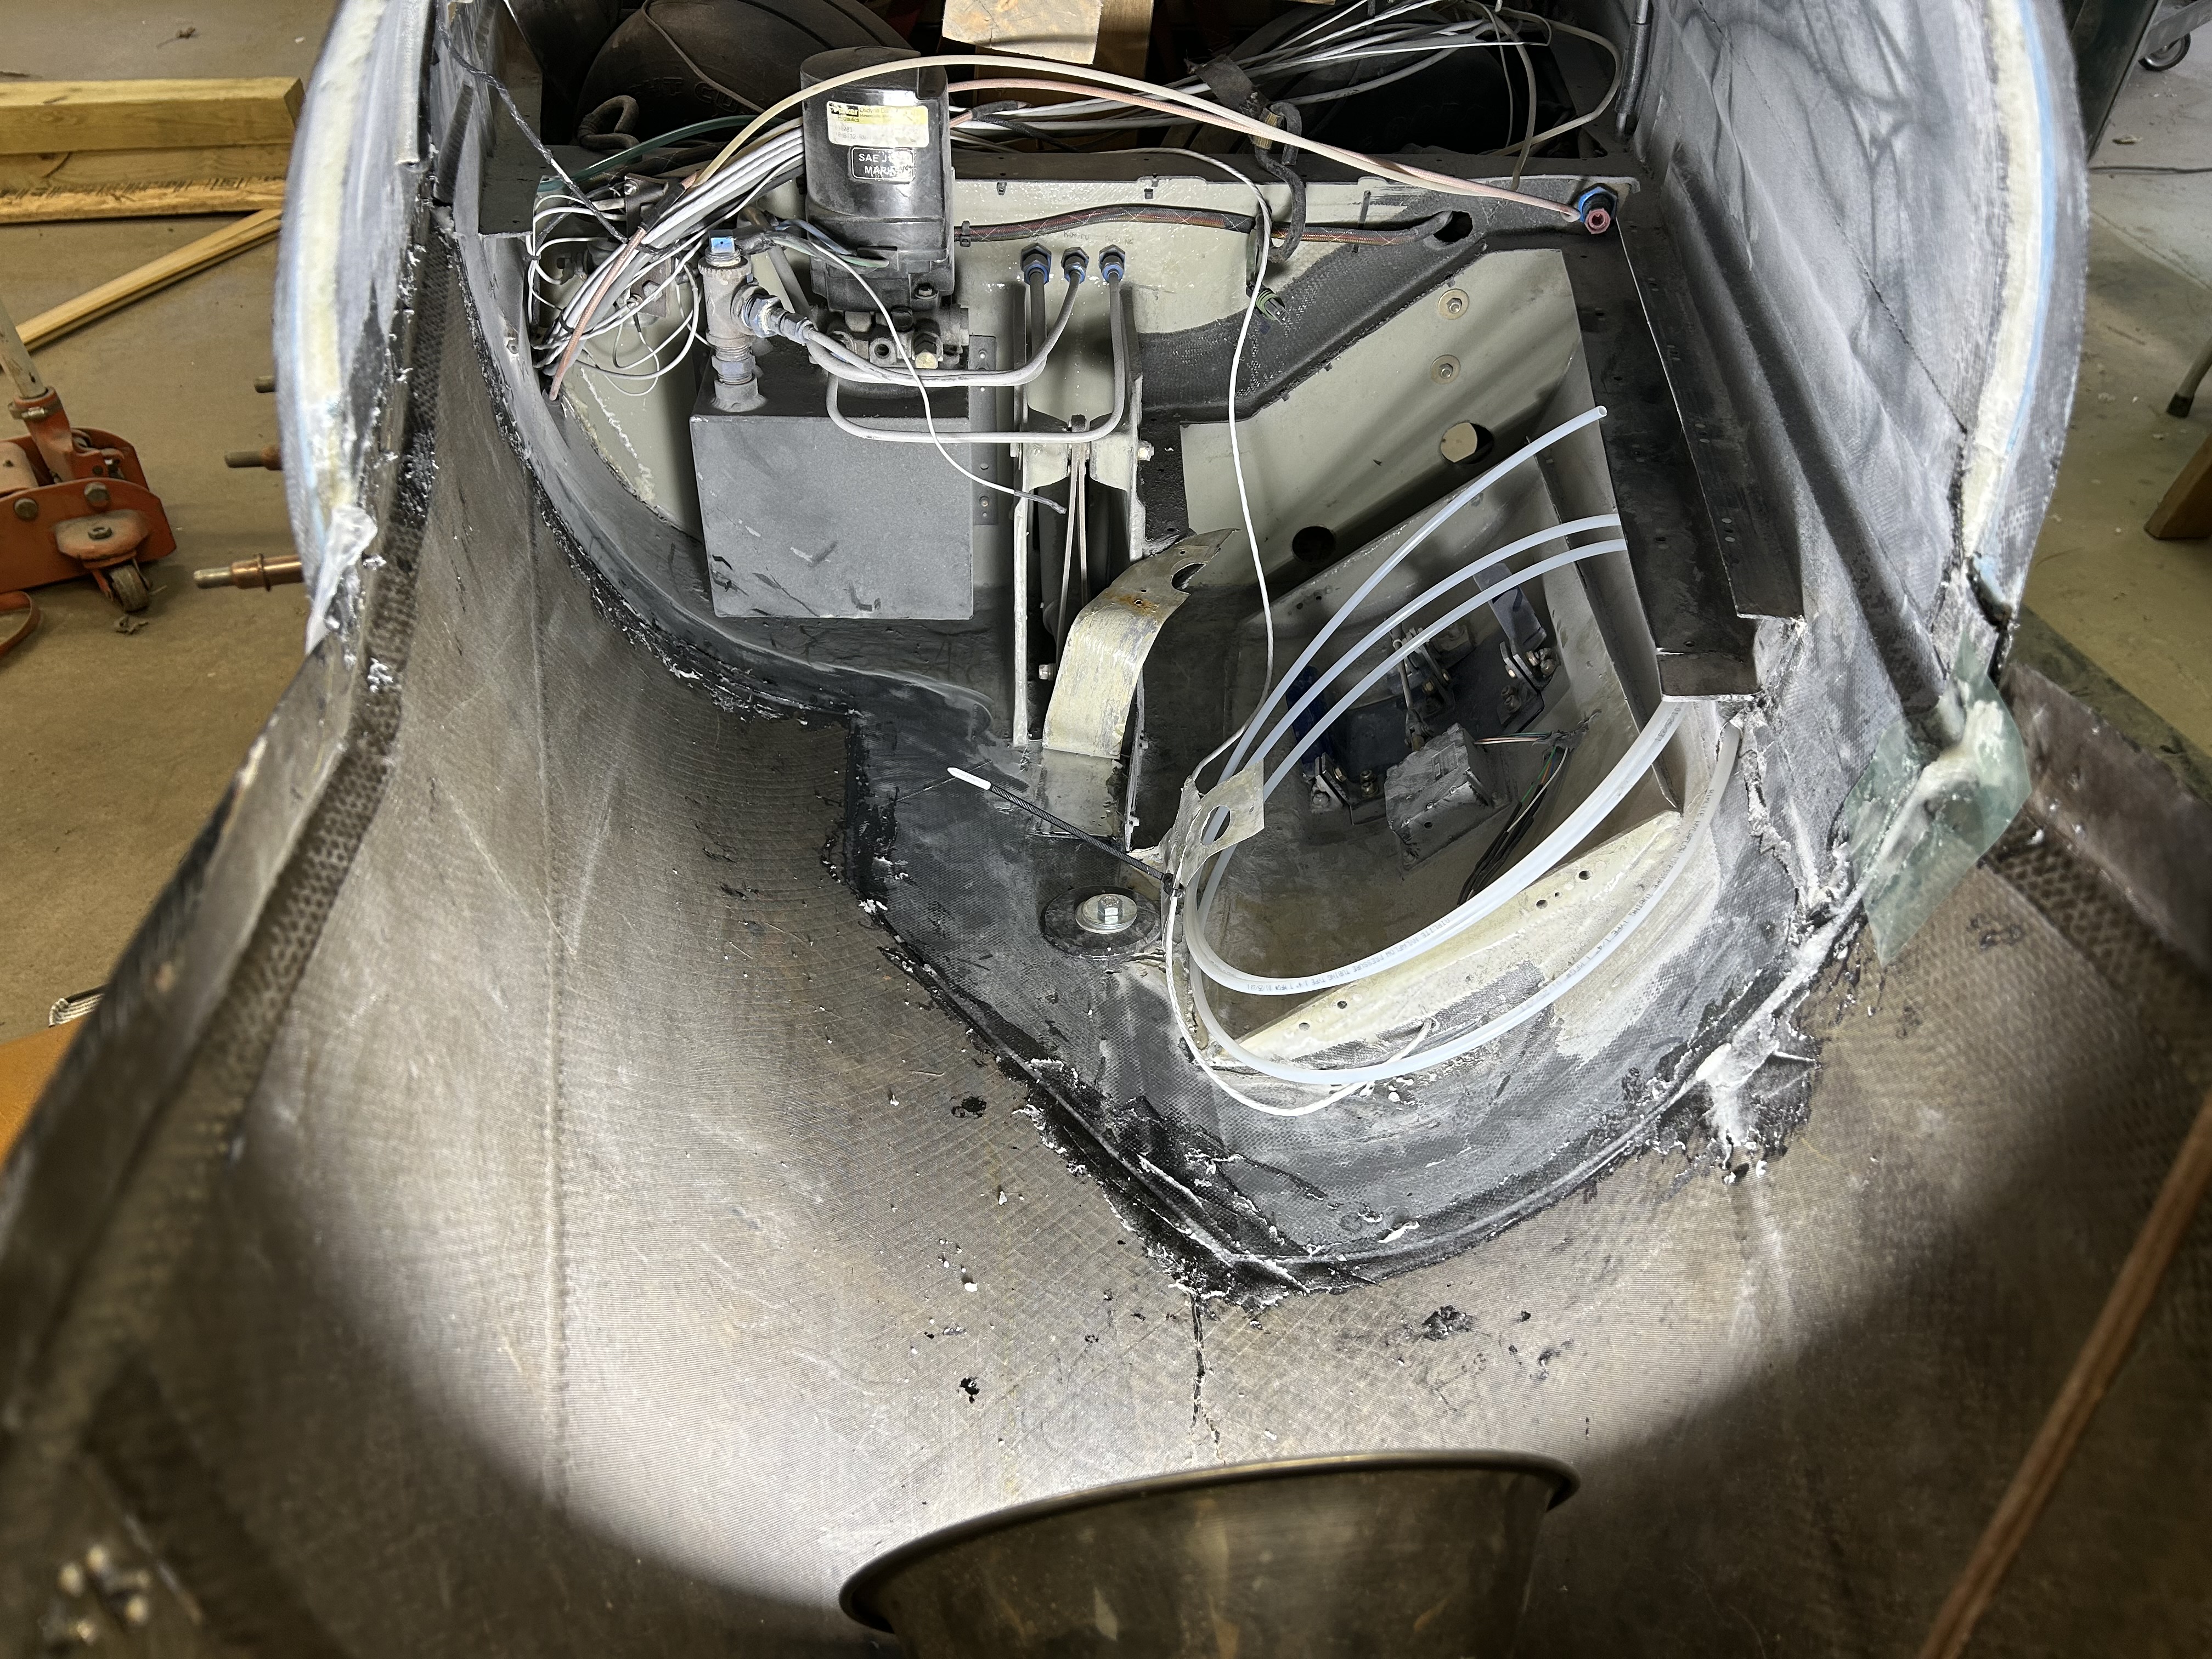 Lower fuselage sections bonded